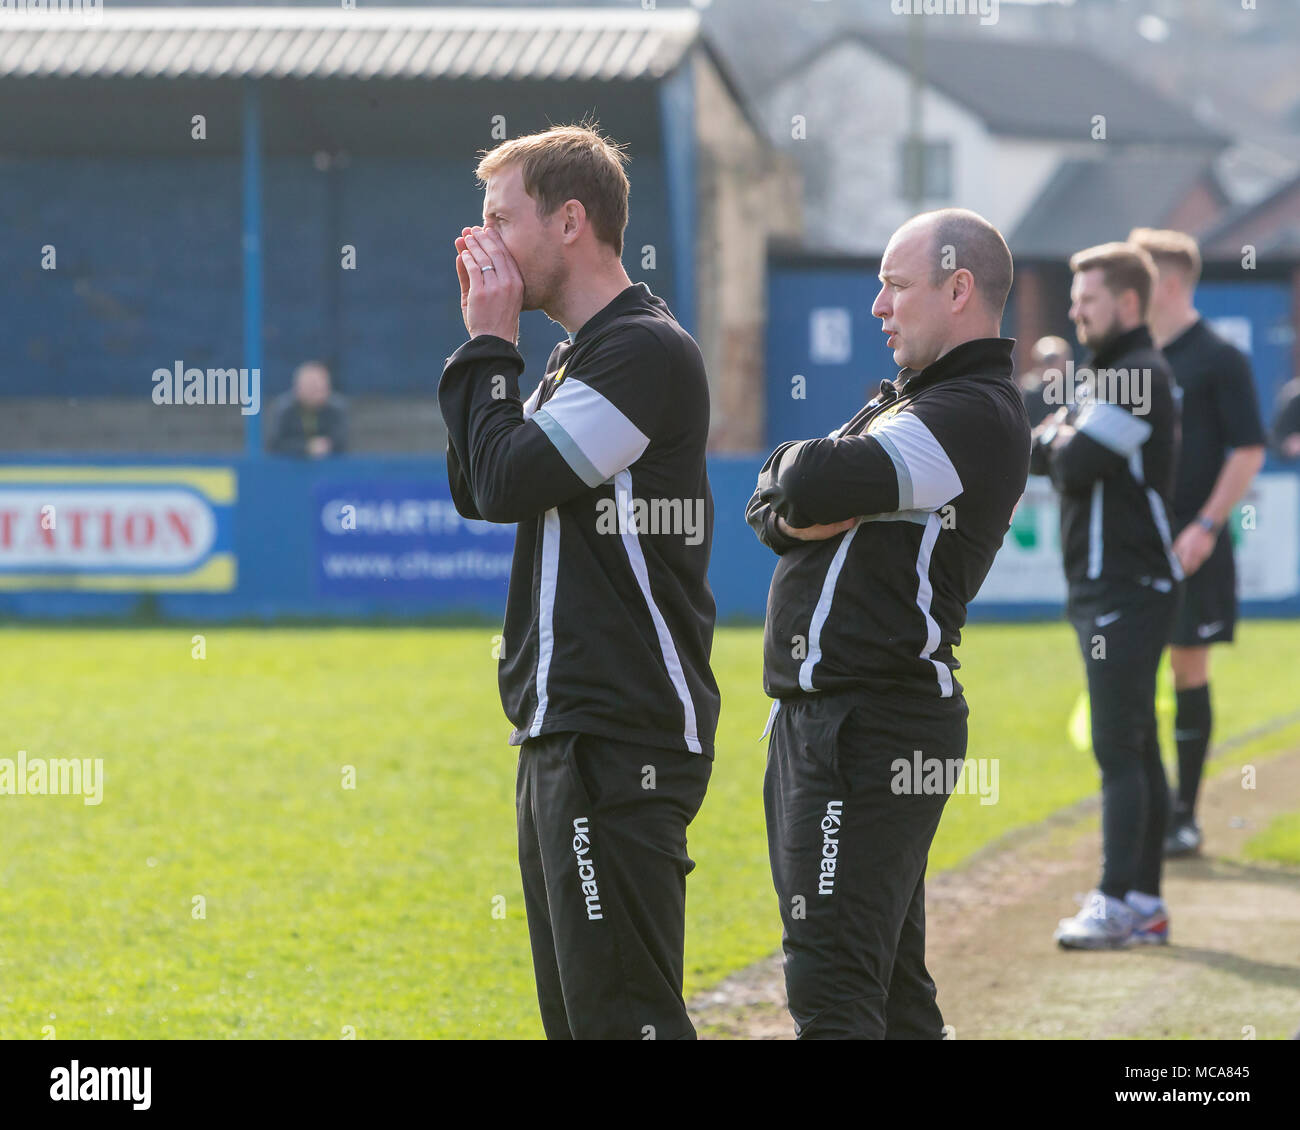 Warrington Town assistant manager, Mark Beesley, and manager, Paul Carden, watch the match at Throstle Nest, Farsley during the game between Warrington Town FC and Farsley Celtic on 14 April 2018 where Warrington won 2 - 0 Credit: John Hopkins/Alamy Live News Stock Photo